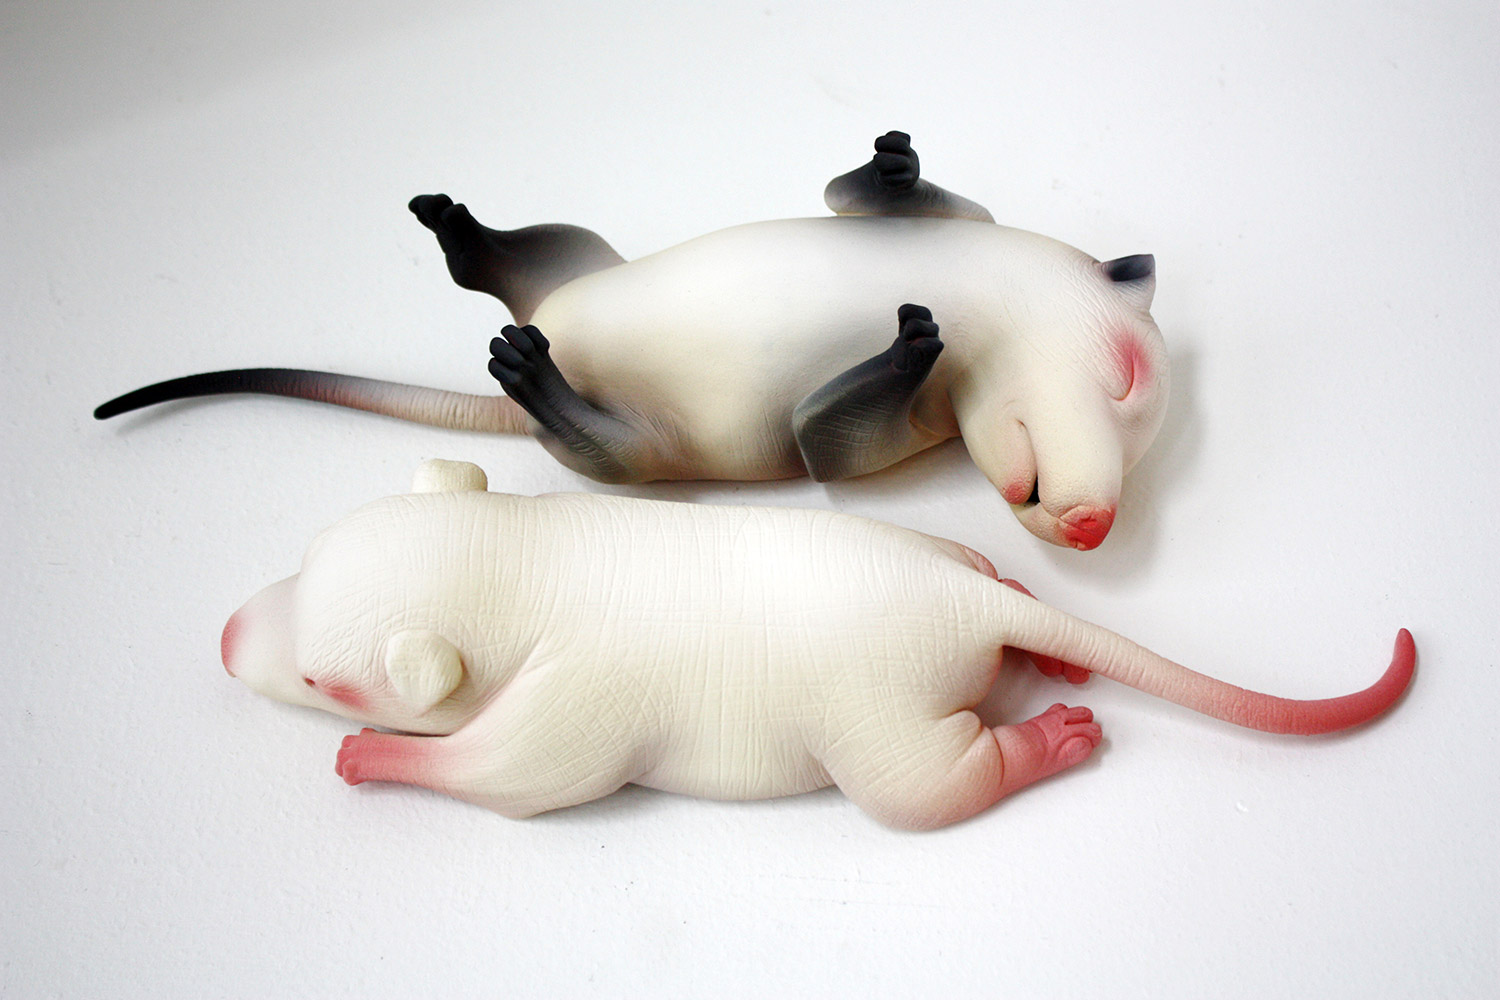 Erika Sanada - two rodents lying side-by-side